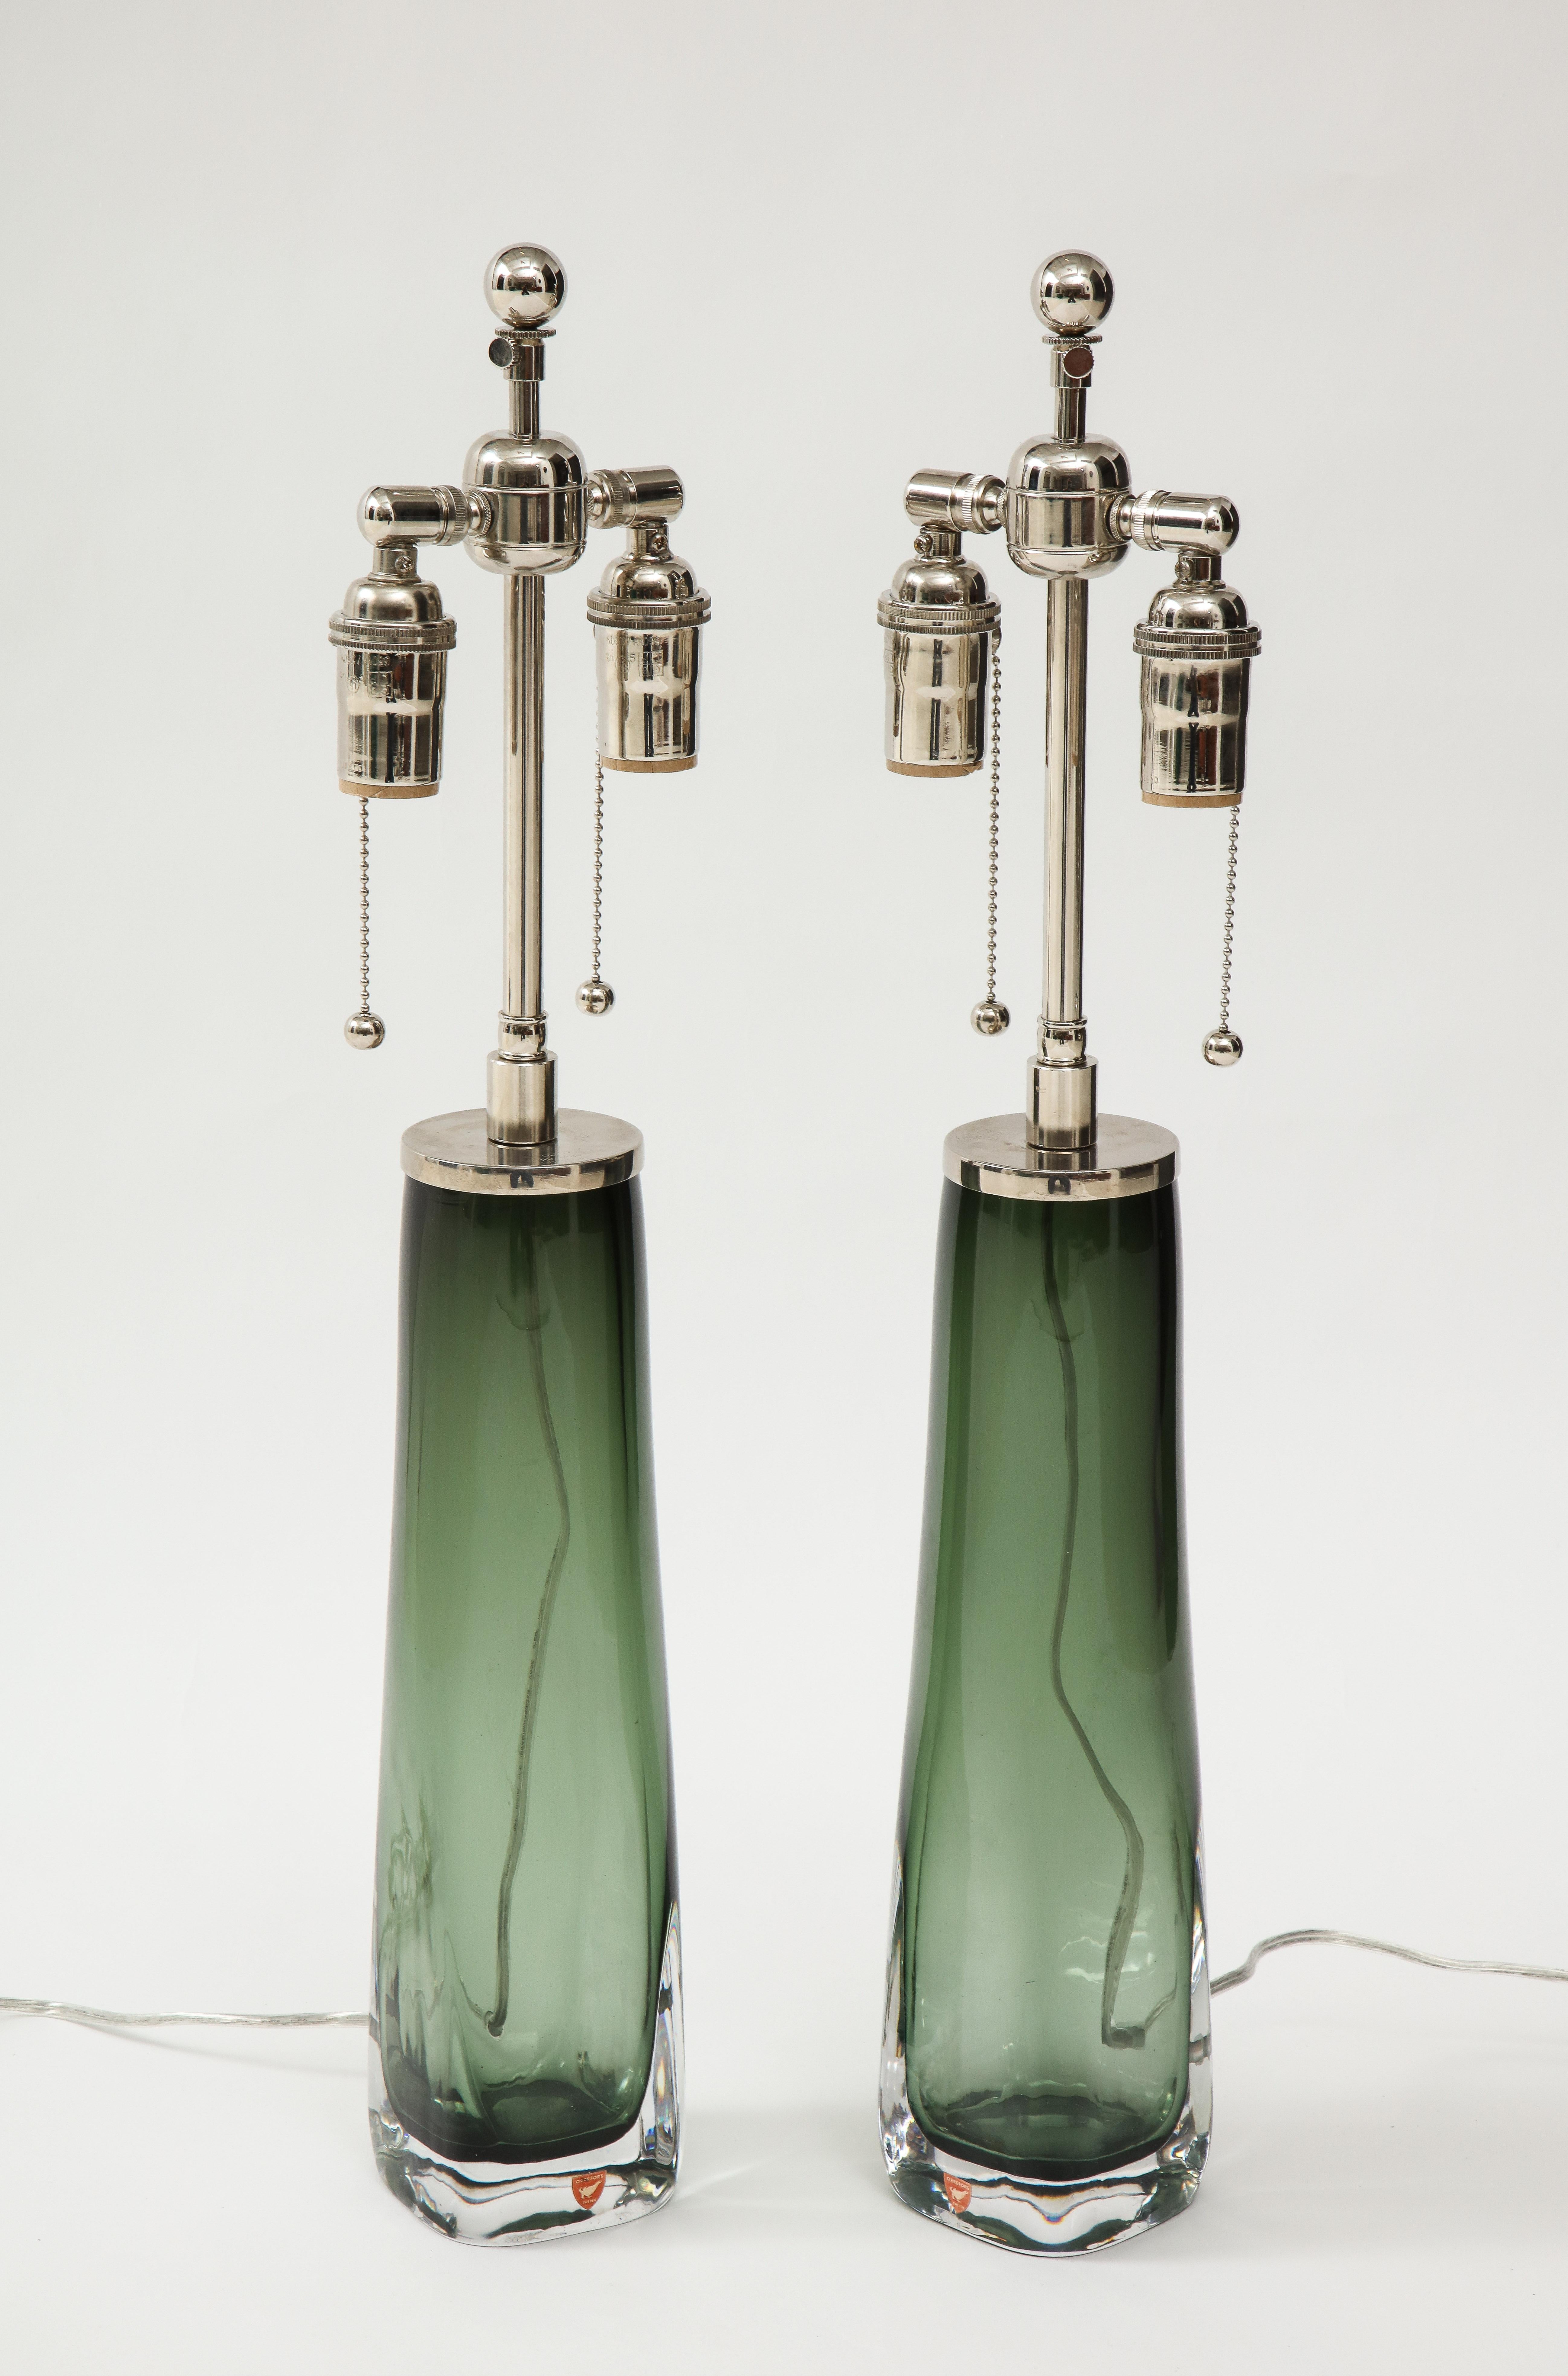 Pair of 1960s sleek glass lamps by Carl Fagerlund for Orrefors.
The beautiful green transparent glass lamps have been newly rewired for the US
with adjustable polished chrome double clusters that take standard size light bulbs.
They retain there